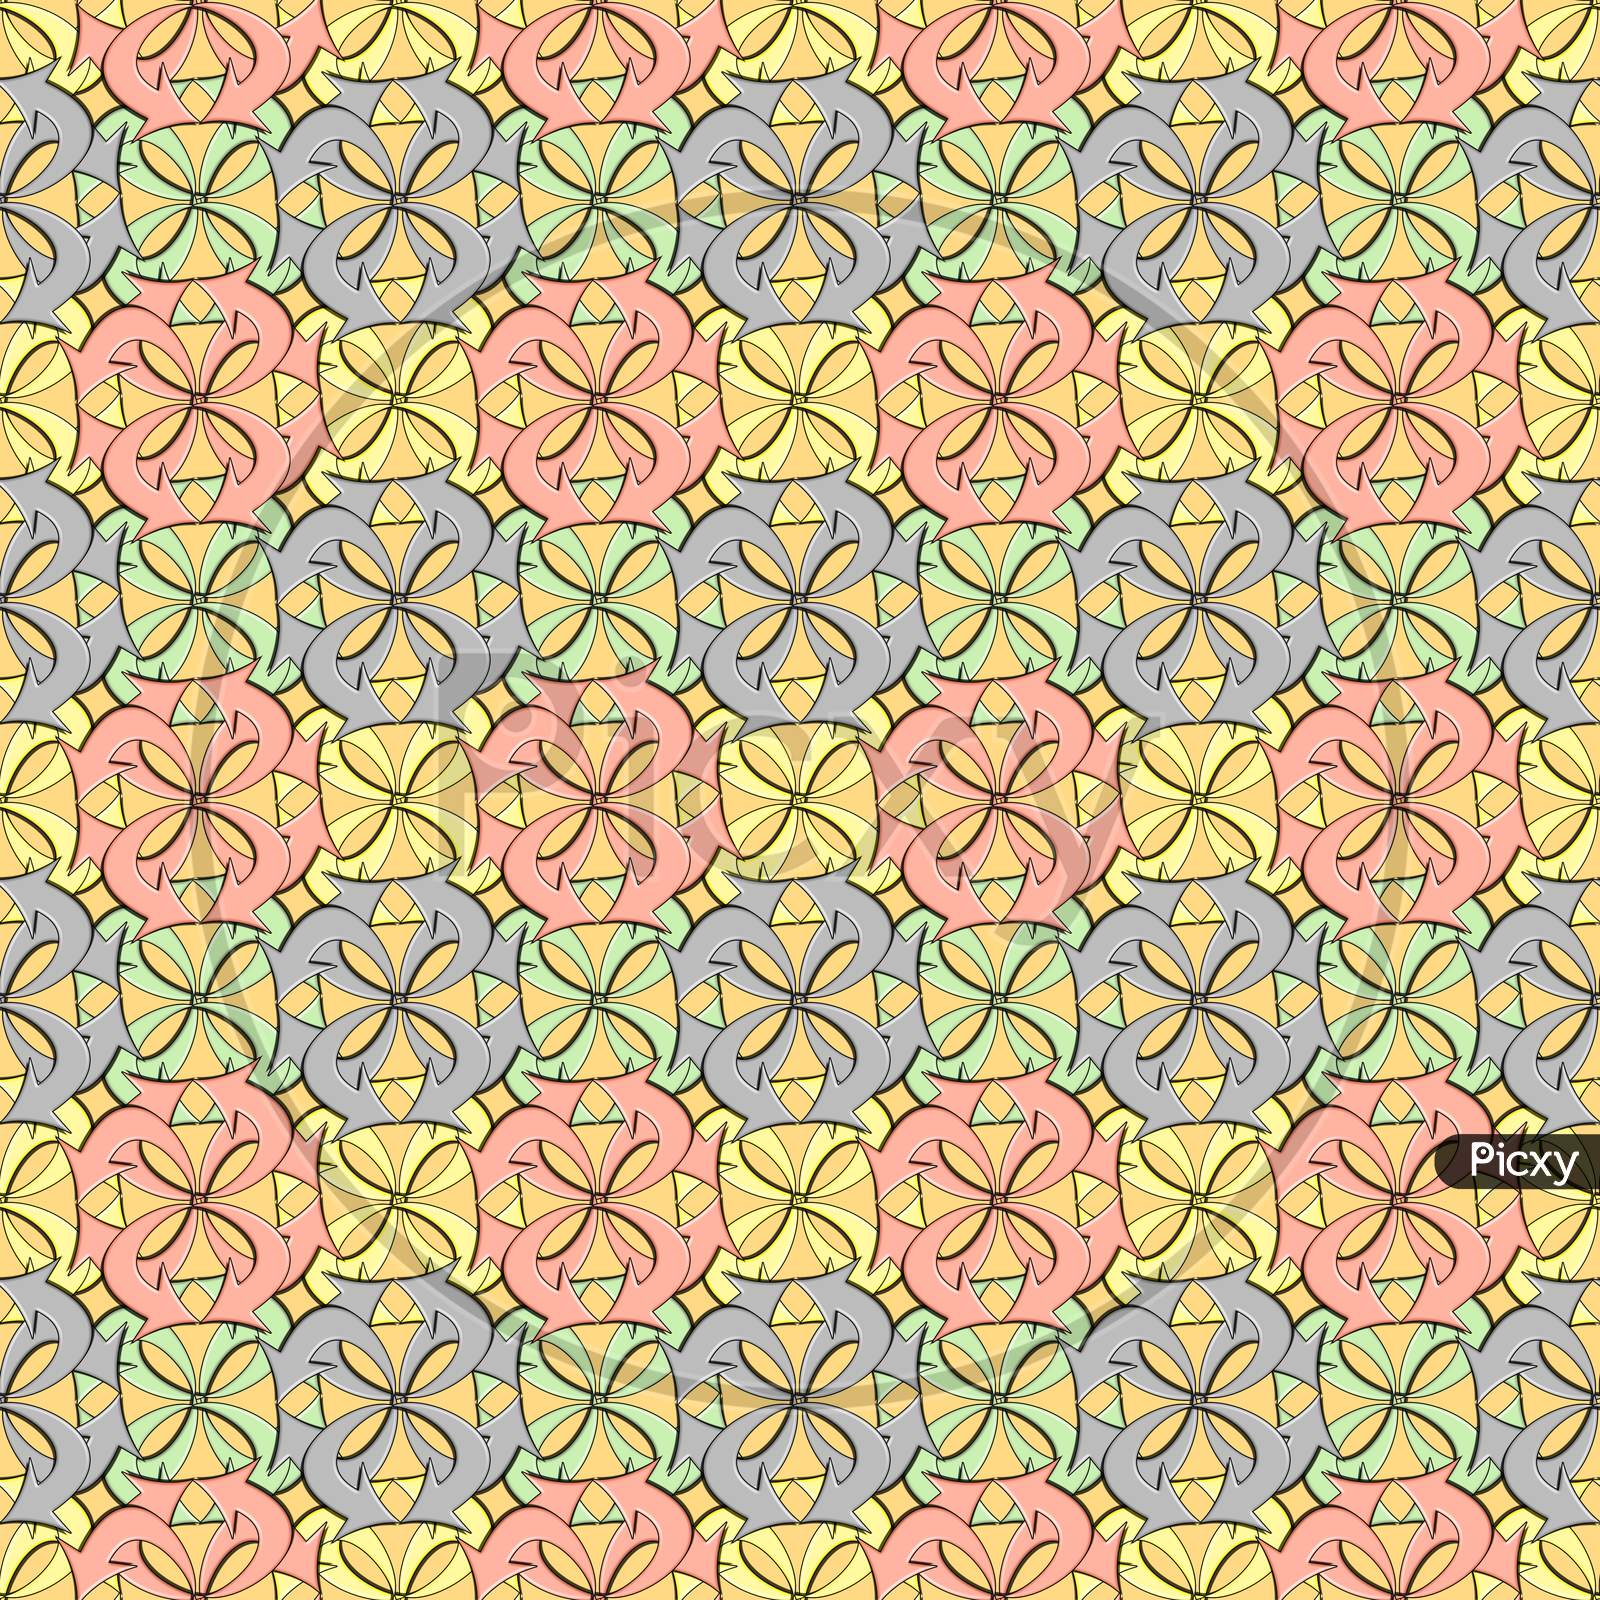 Official And Textile Based Seamless Pattern